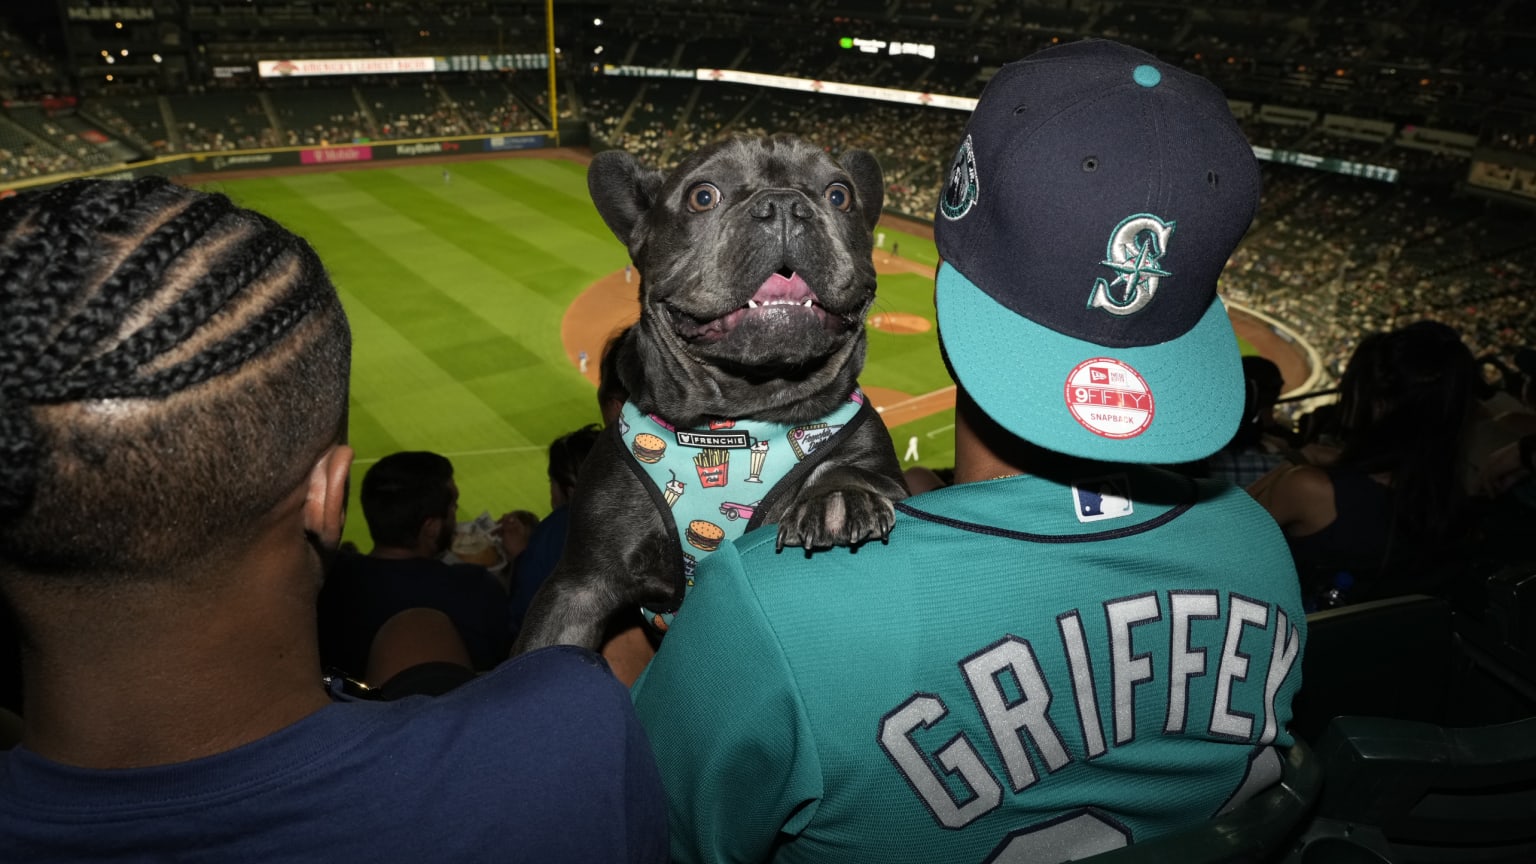 Who Let The Dogs In (To Safeco Field)? Mariners Host Bark in the Park